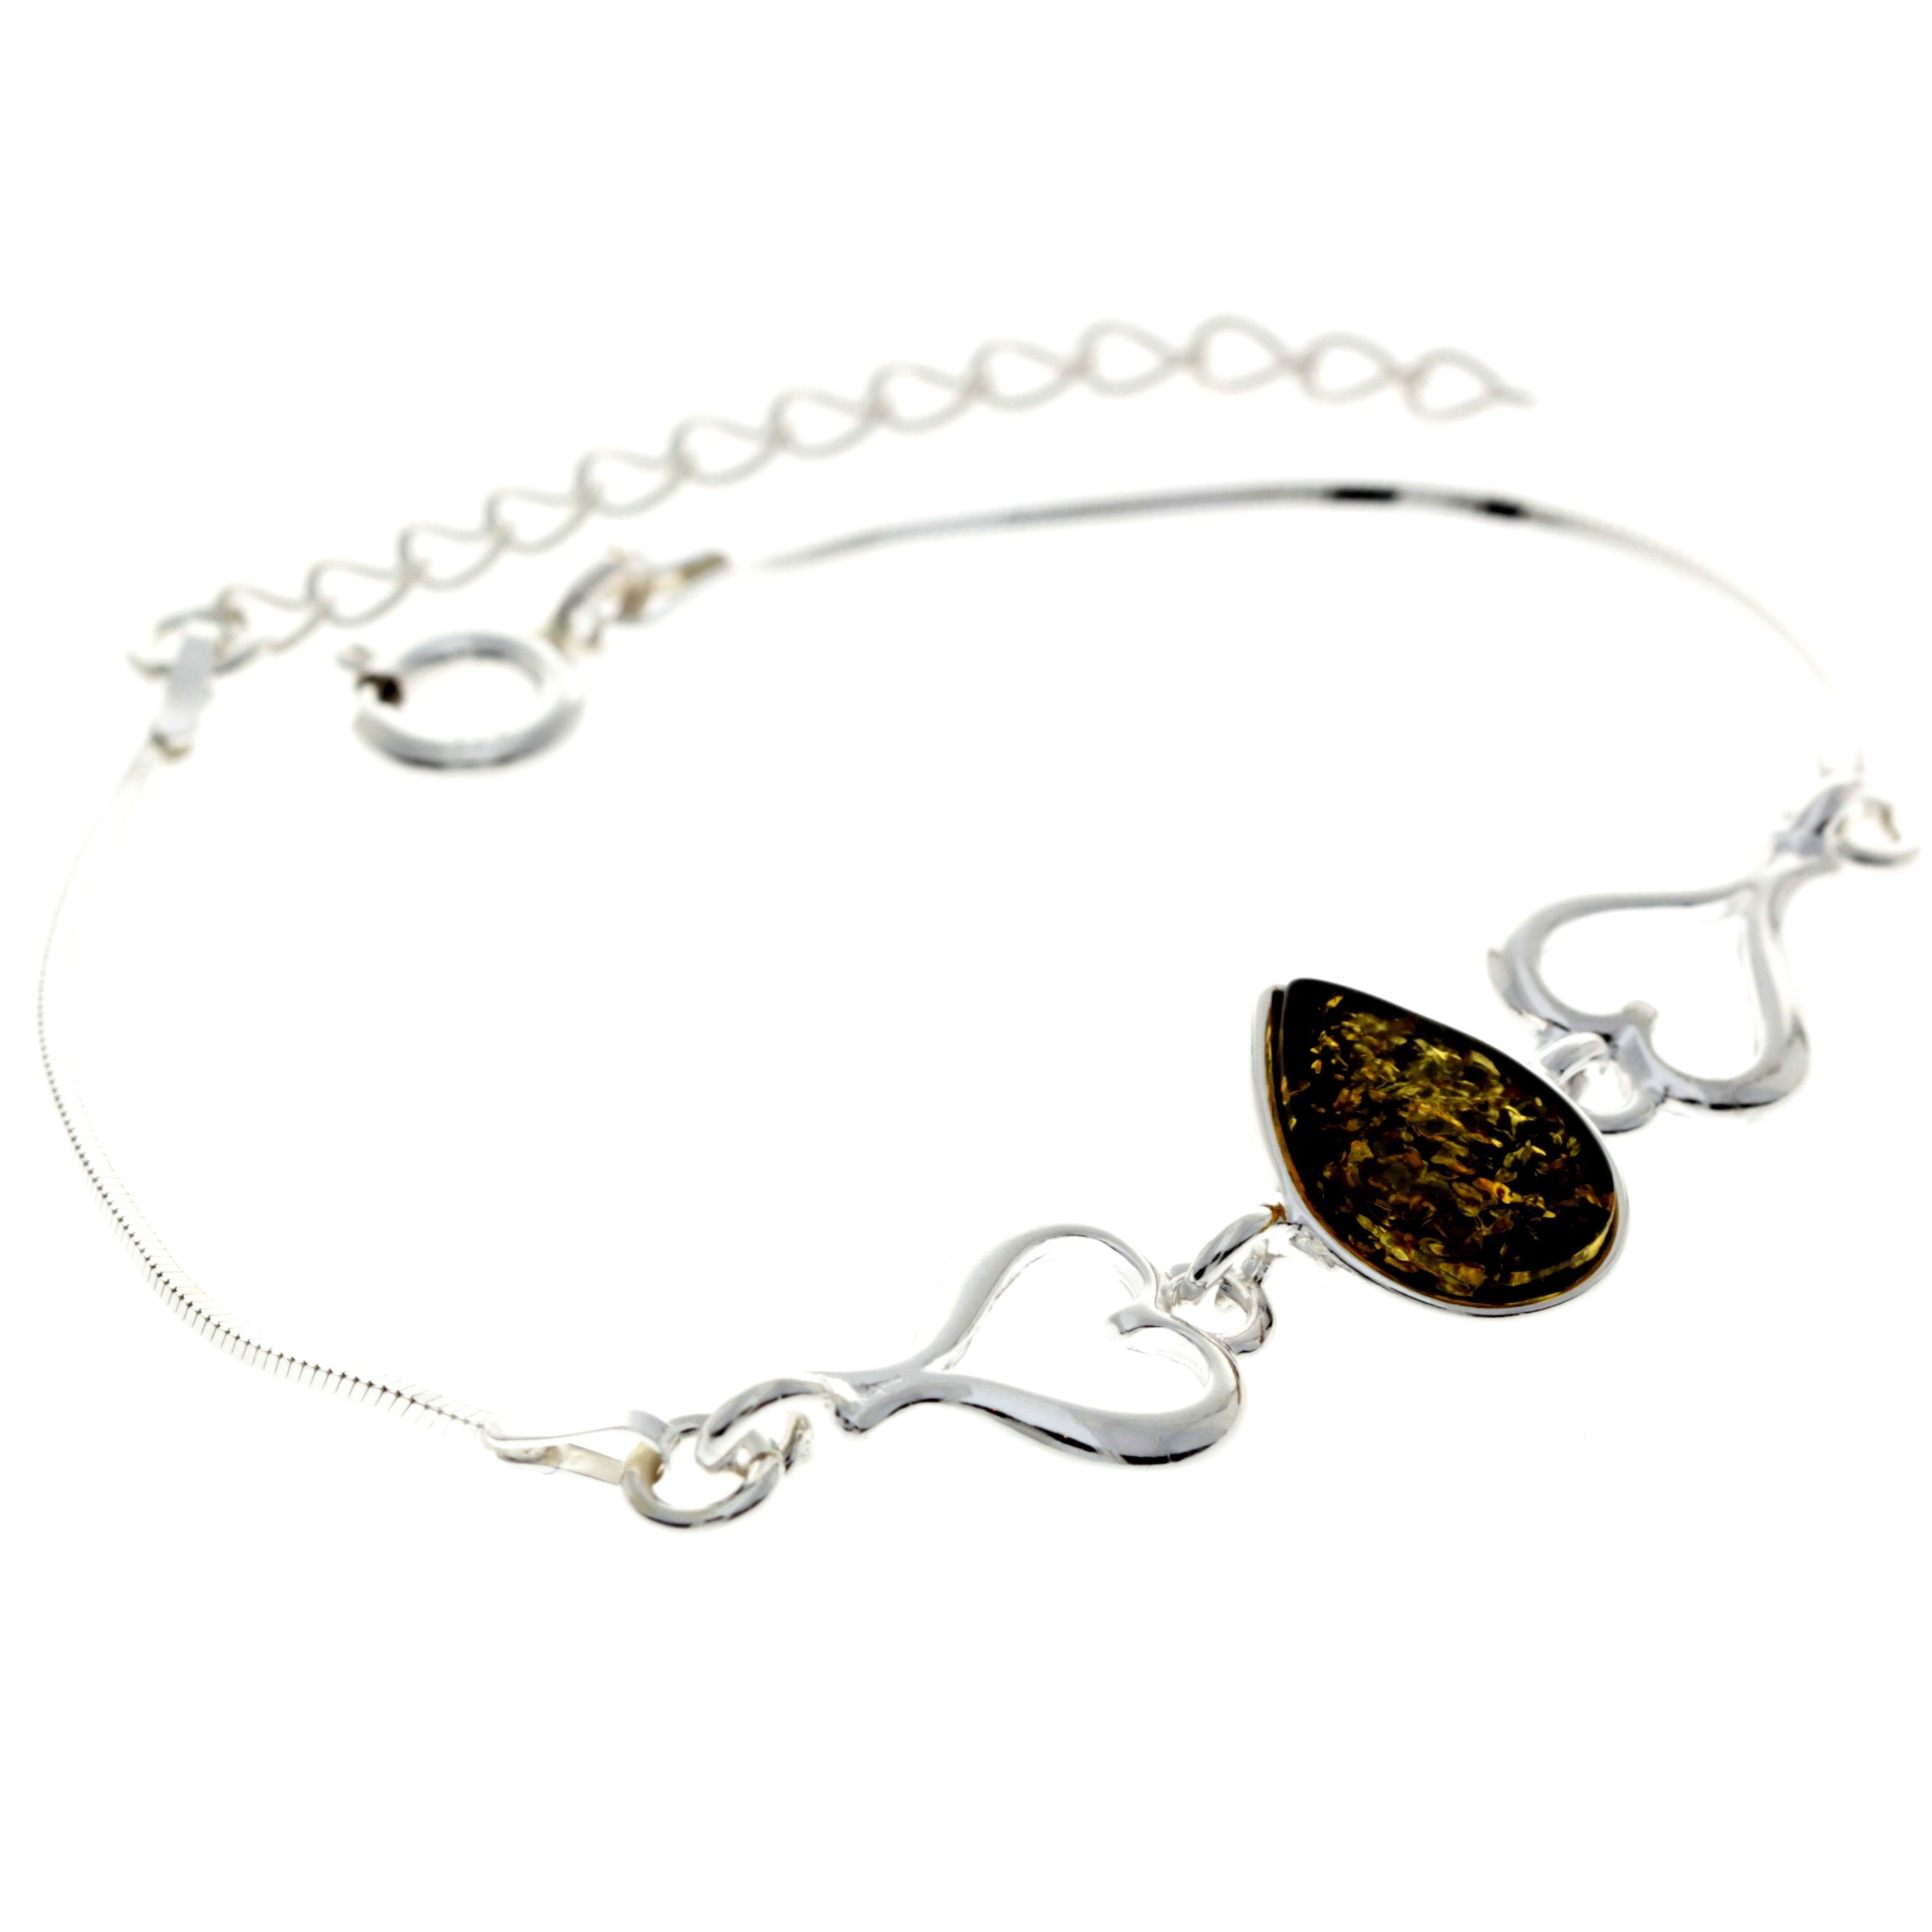 925 Sterling Silver & Baltic Amber Adjustable Bracelet with Silver Hearts - M567